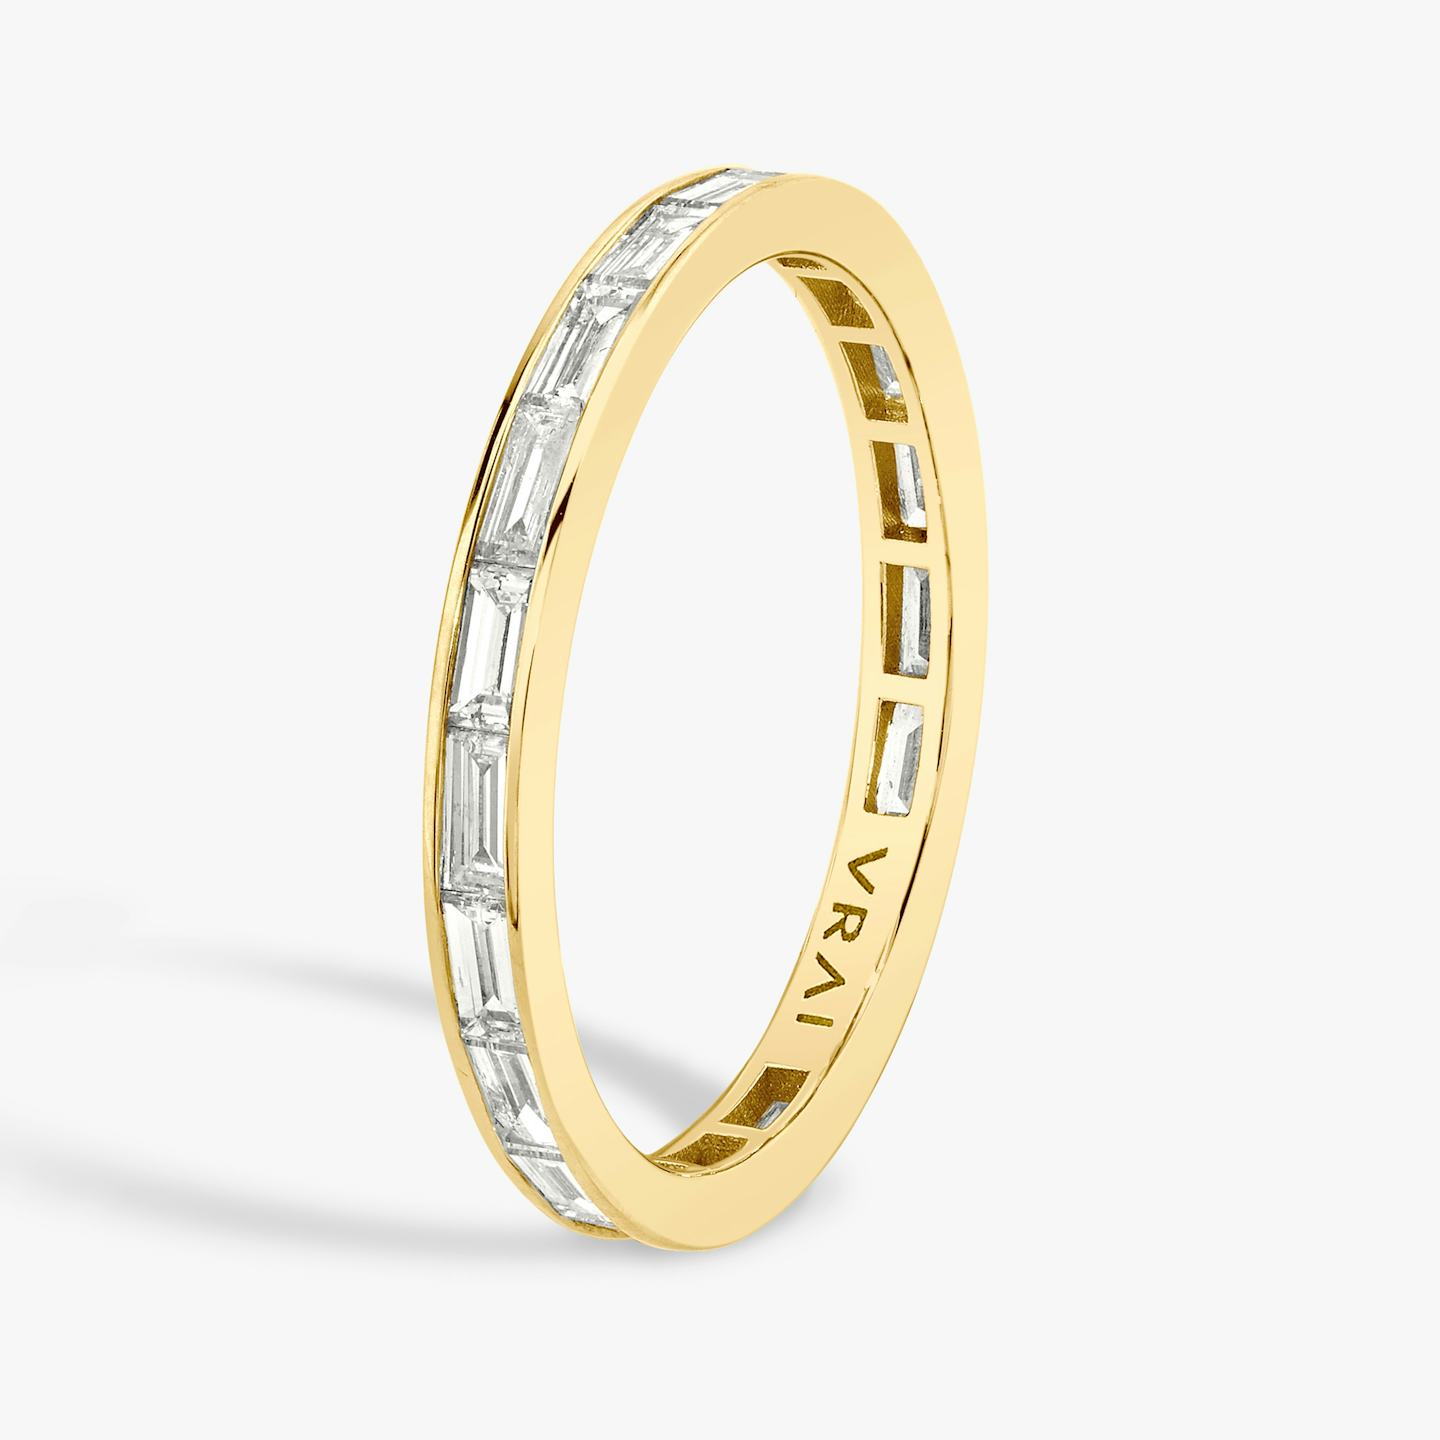 The Devotion Band | Baguette | 18k | 18k Yellow Gold | Band style: Full diamond | Band width: Large